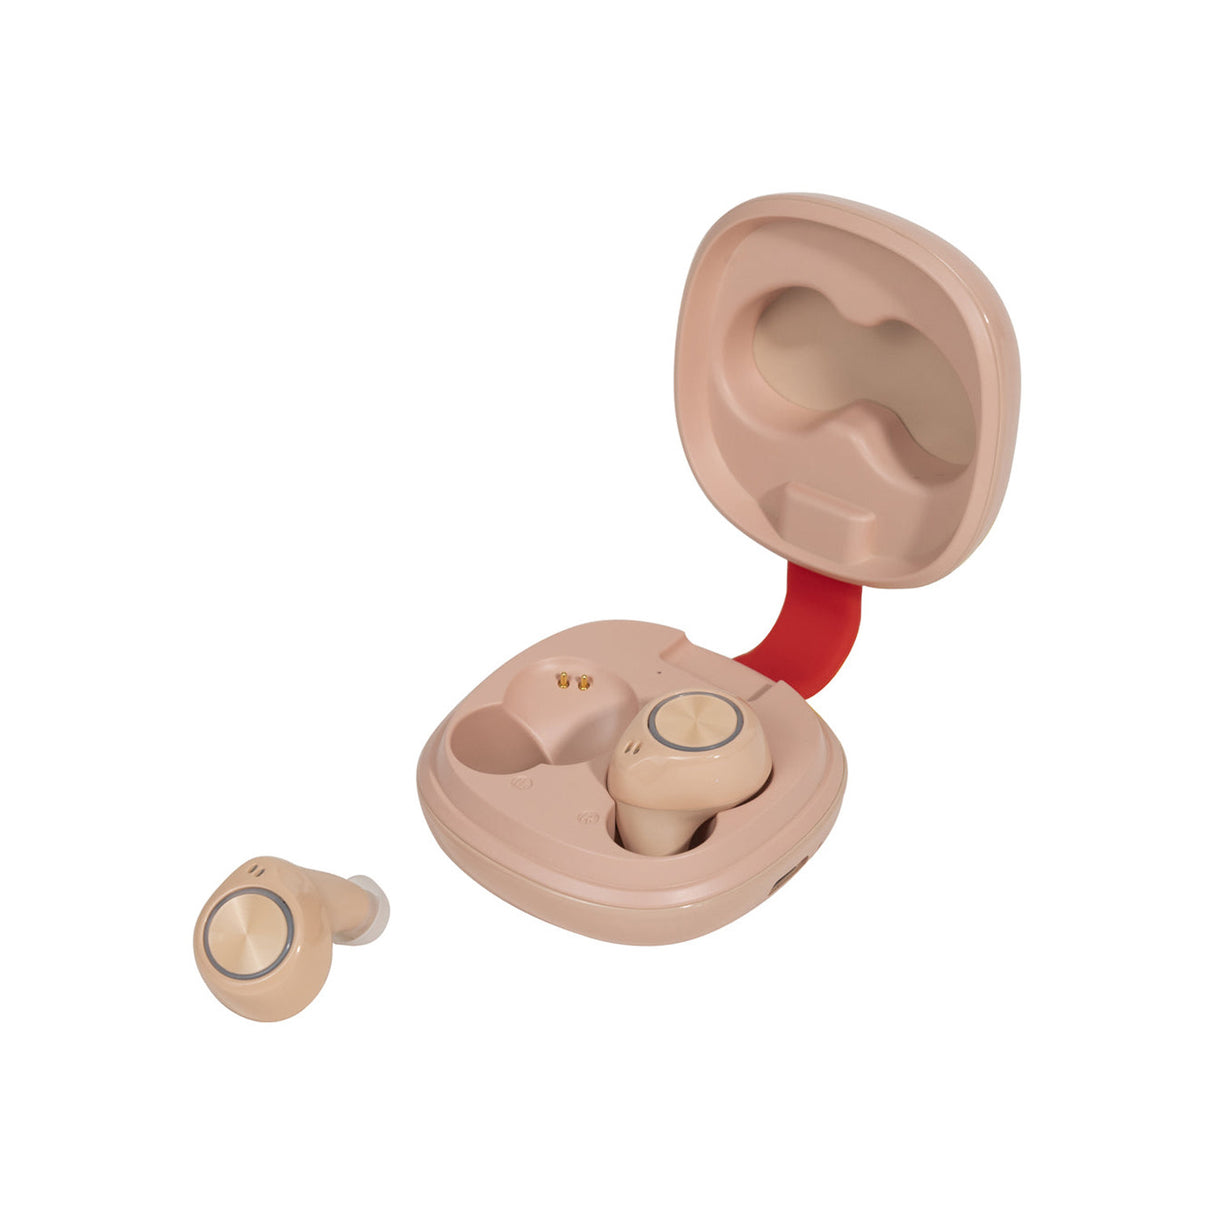 BPL Ear Buddy MX 300: Wireless earbuds, noise-canceling - the ultimate audio duo.